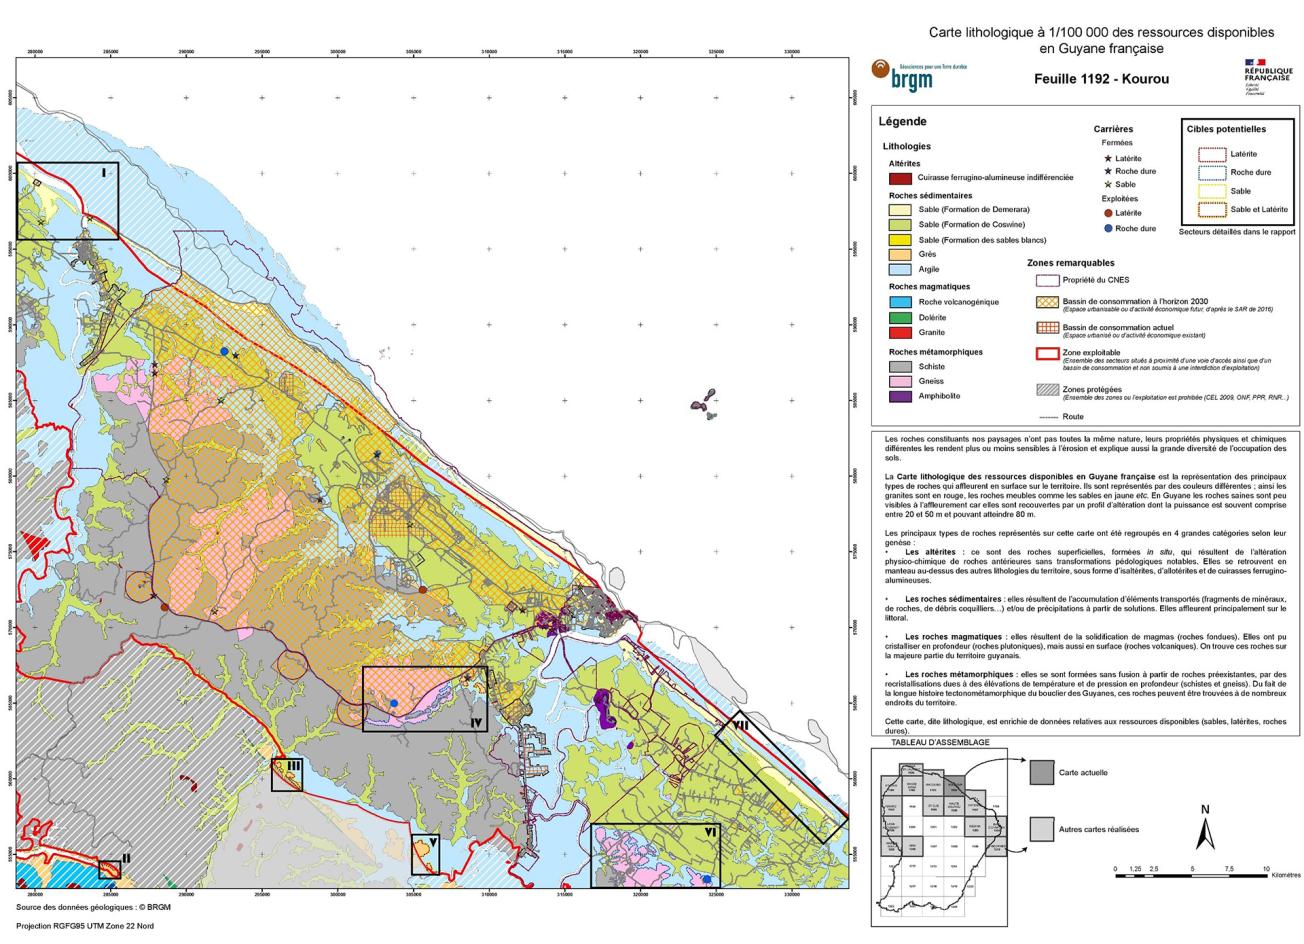 Example of a 1:100 000 lithological map available in the BRGM atlas 